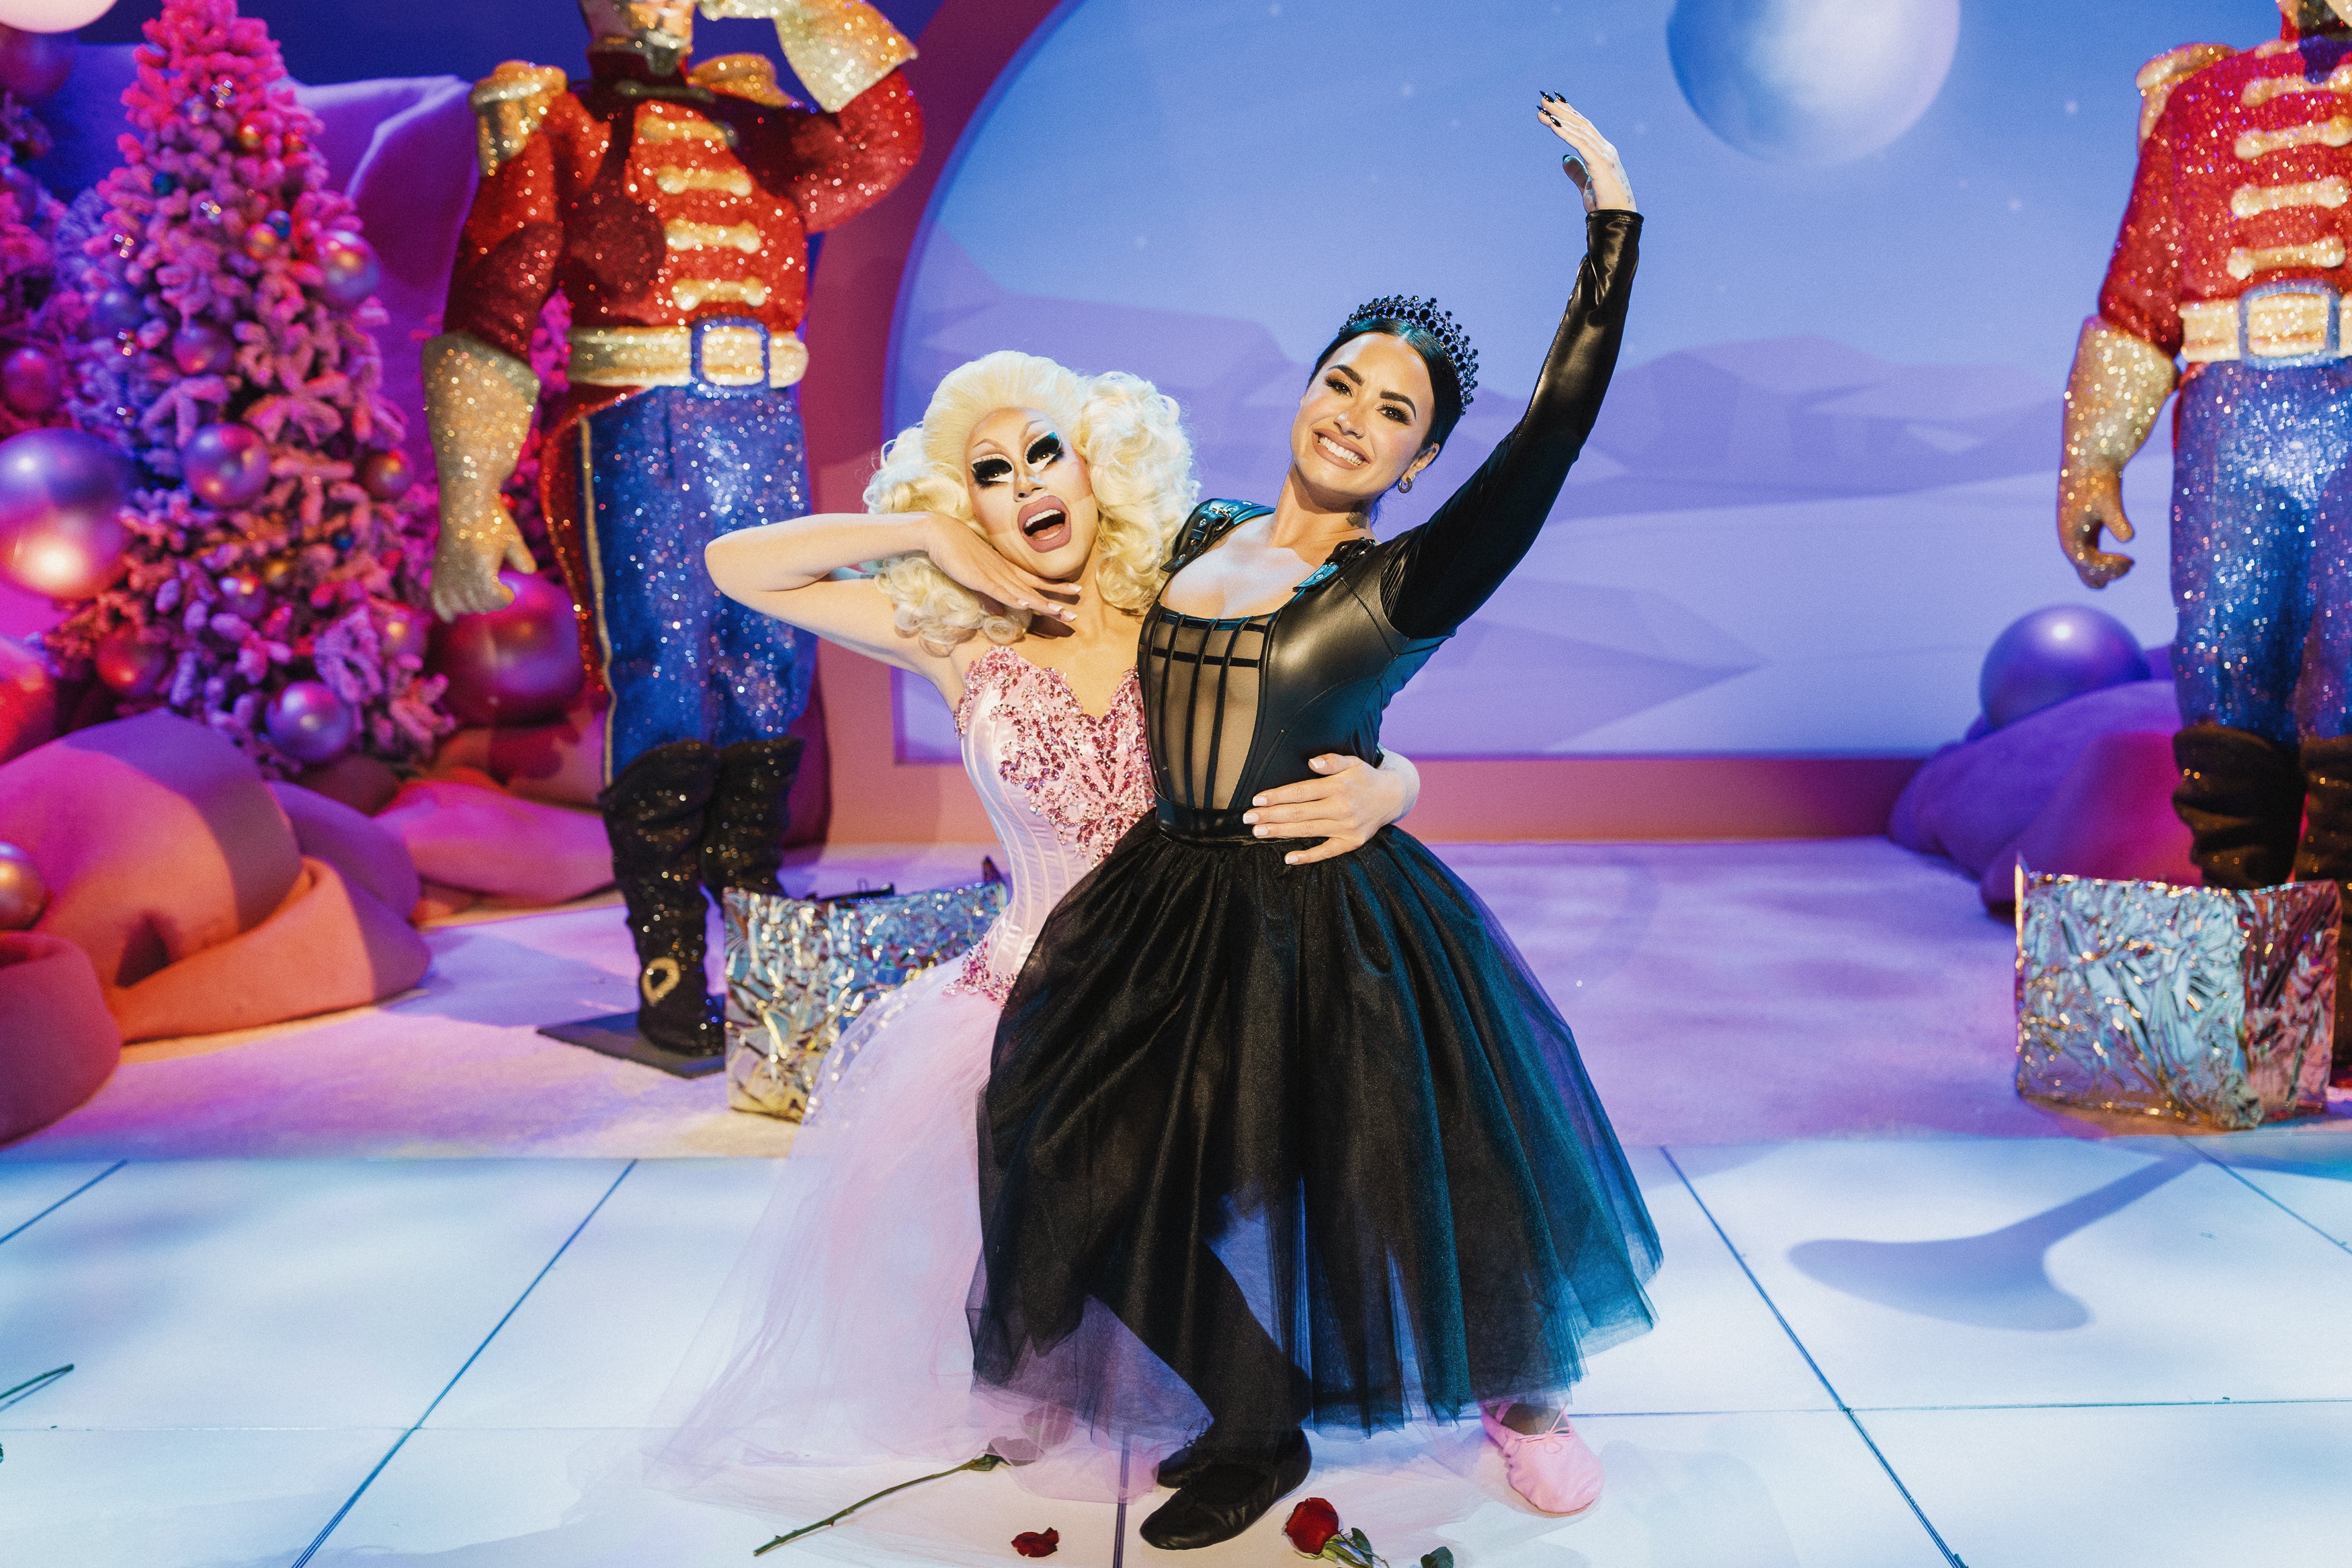 Drag queen Trixie Mattel in a pink ballet costume with her arm wrapped around Demi Lovato, dressed in a black ballet costume on a "Nutcracker"-themed set for the Roku Original special "A Very Demi Holiday Special"